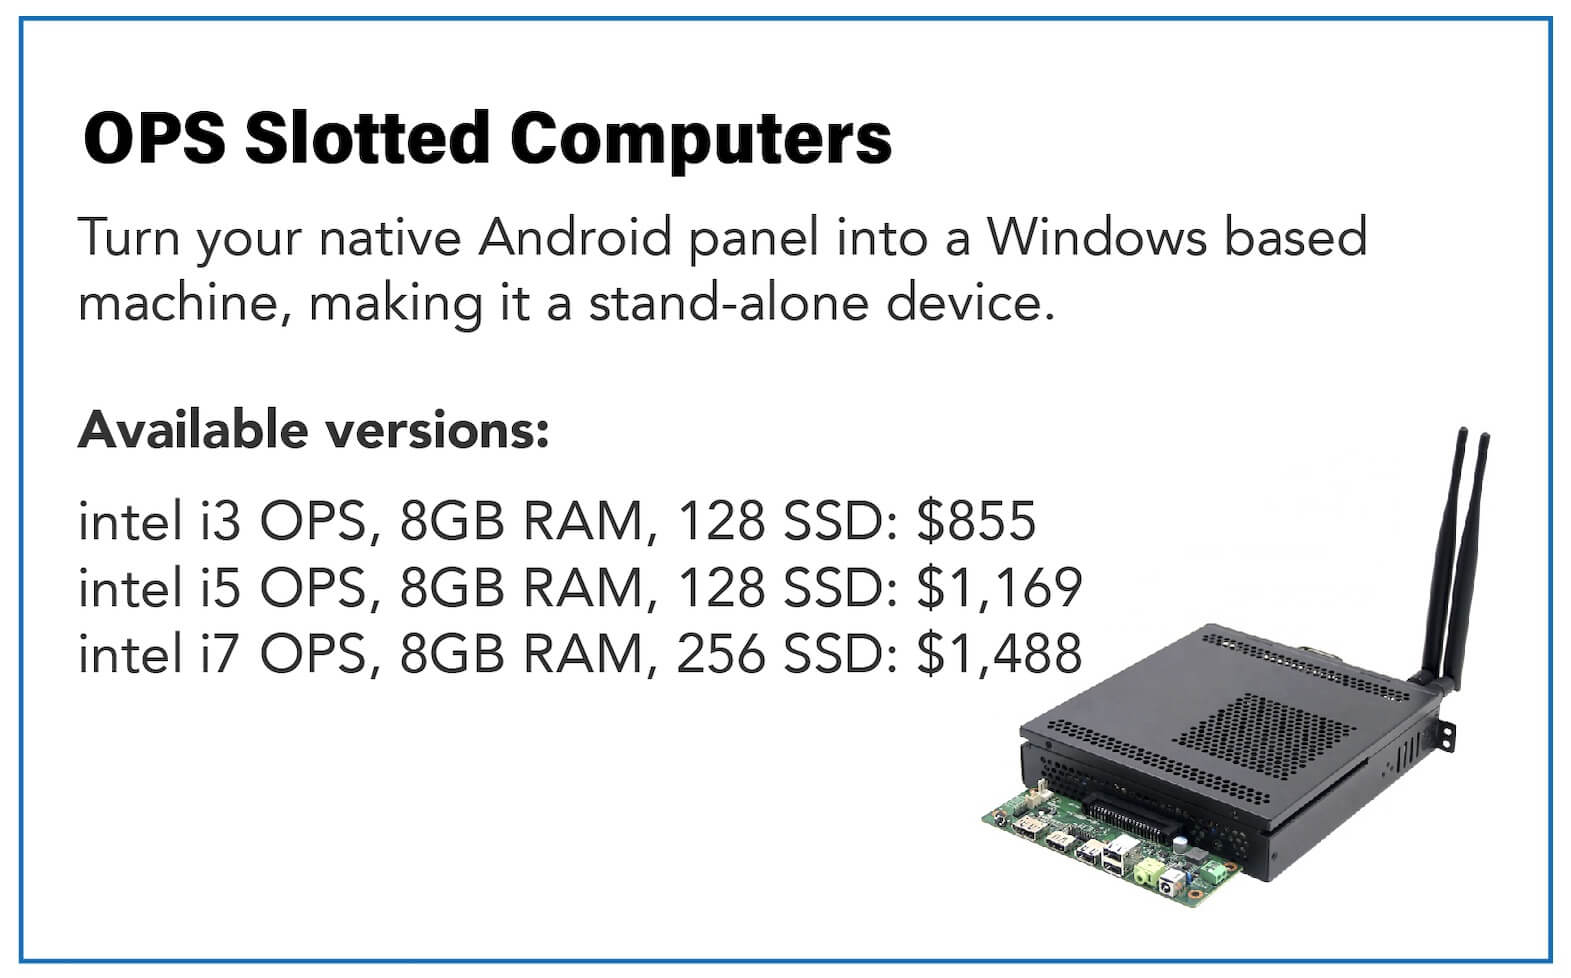 OPS Slotted Computers: Turn your native Android panel into a Windows based machine, making it a stand-alone device.